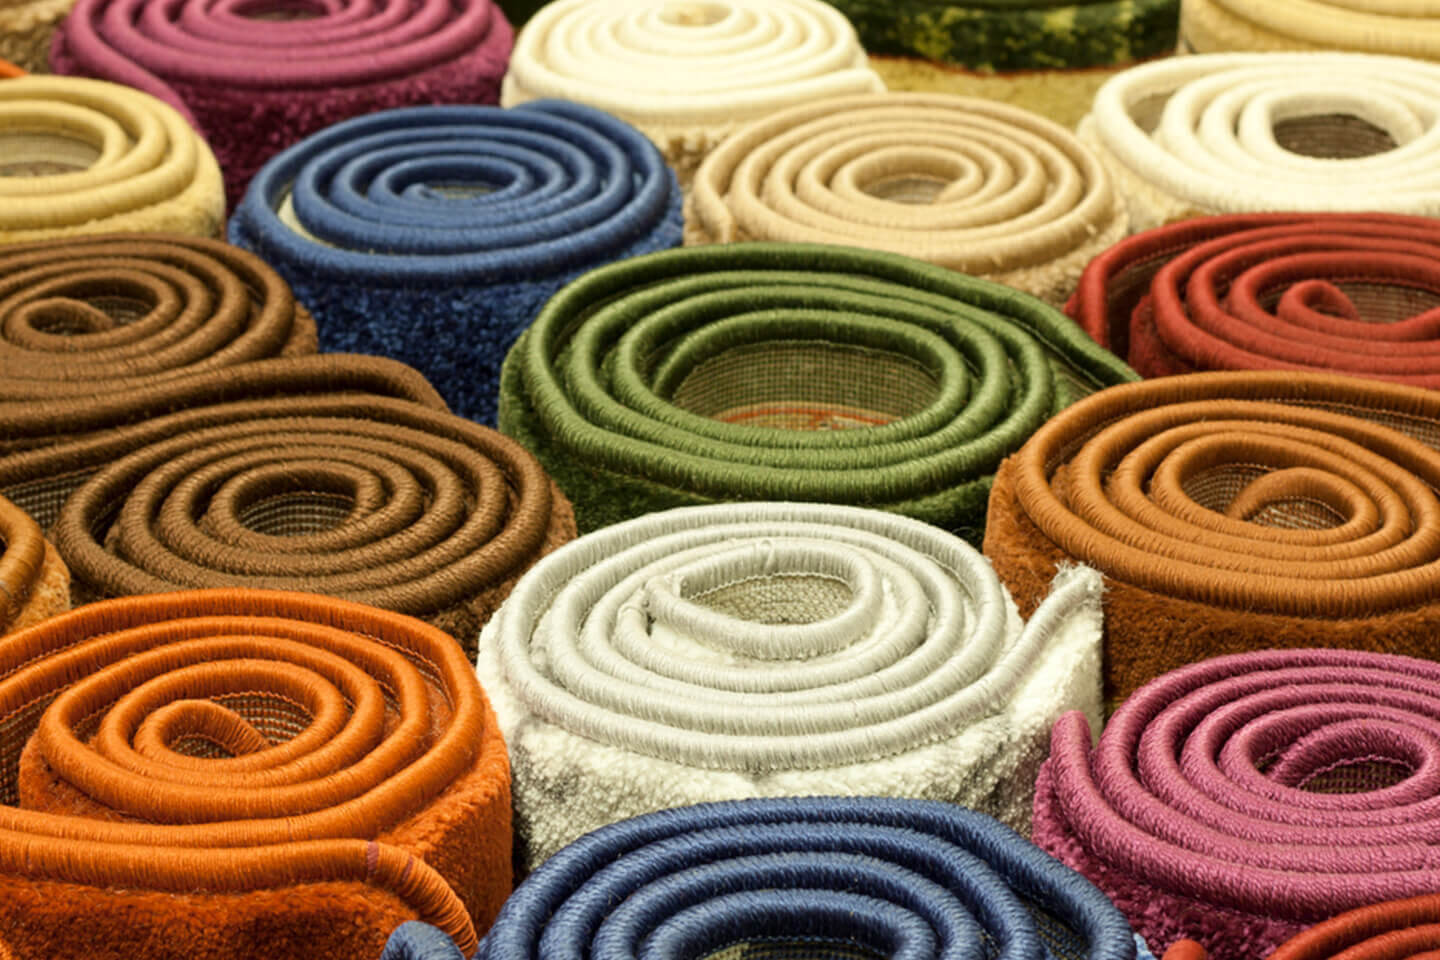 Vertical stacks of different colored rolls of carpet